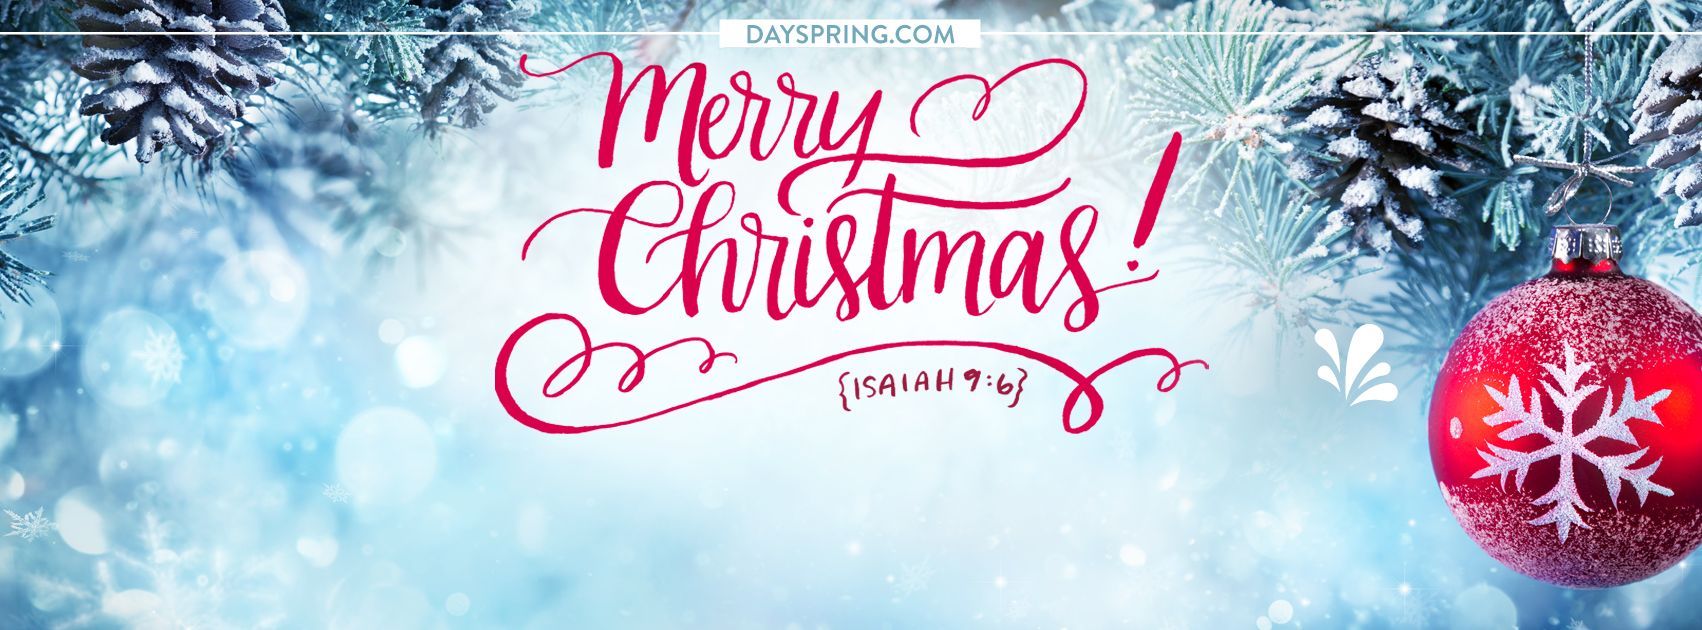 Facebook Cover Photo to Spice Up Your Profile for Christmas. DaySpring. Christmas facebook cover, Christmas cover photo, Facebook christmas cover photo